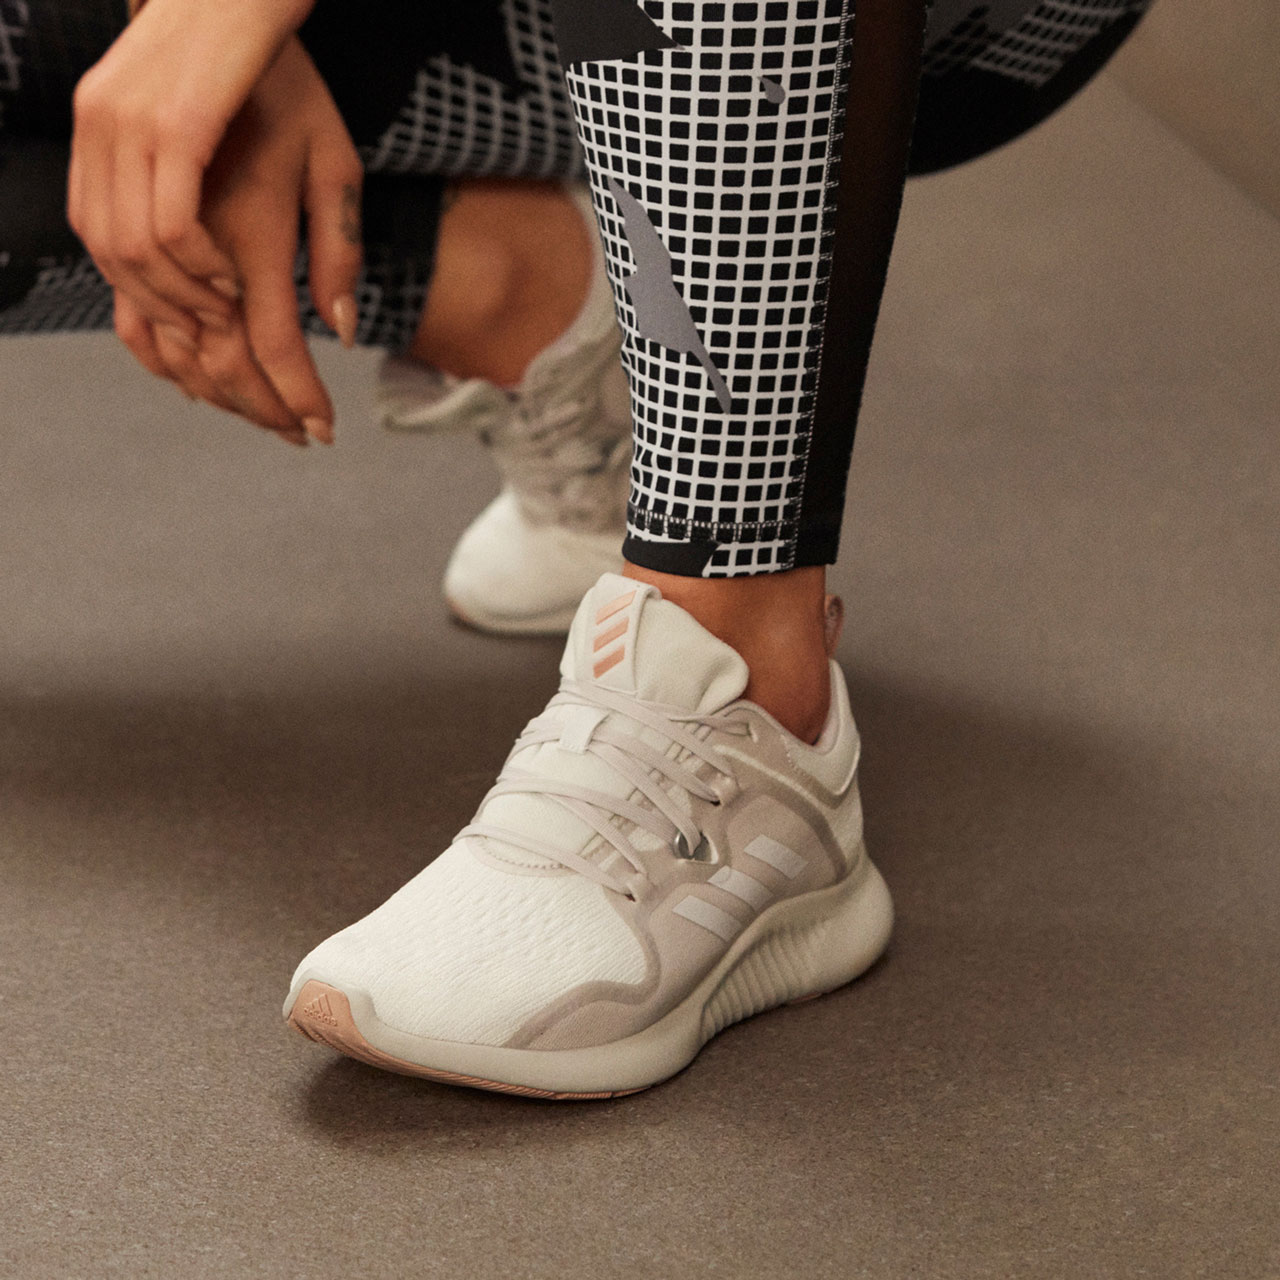 Adidas drops new collection inspired by superstar fitness muses